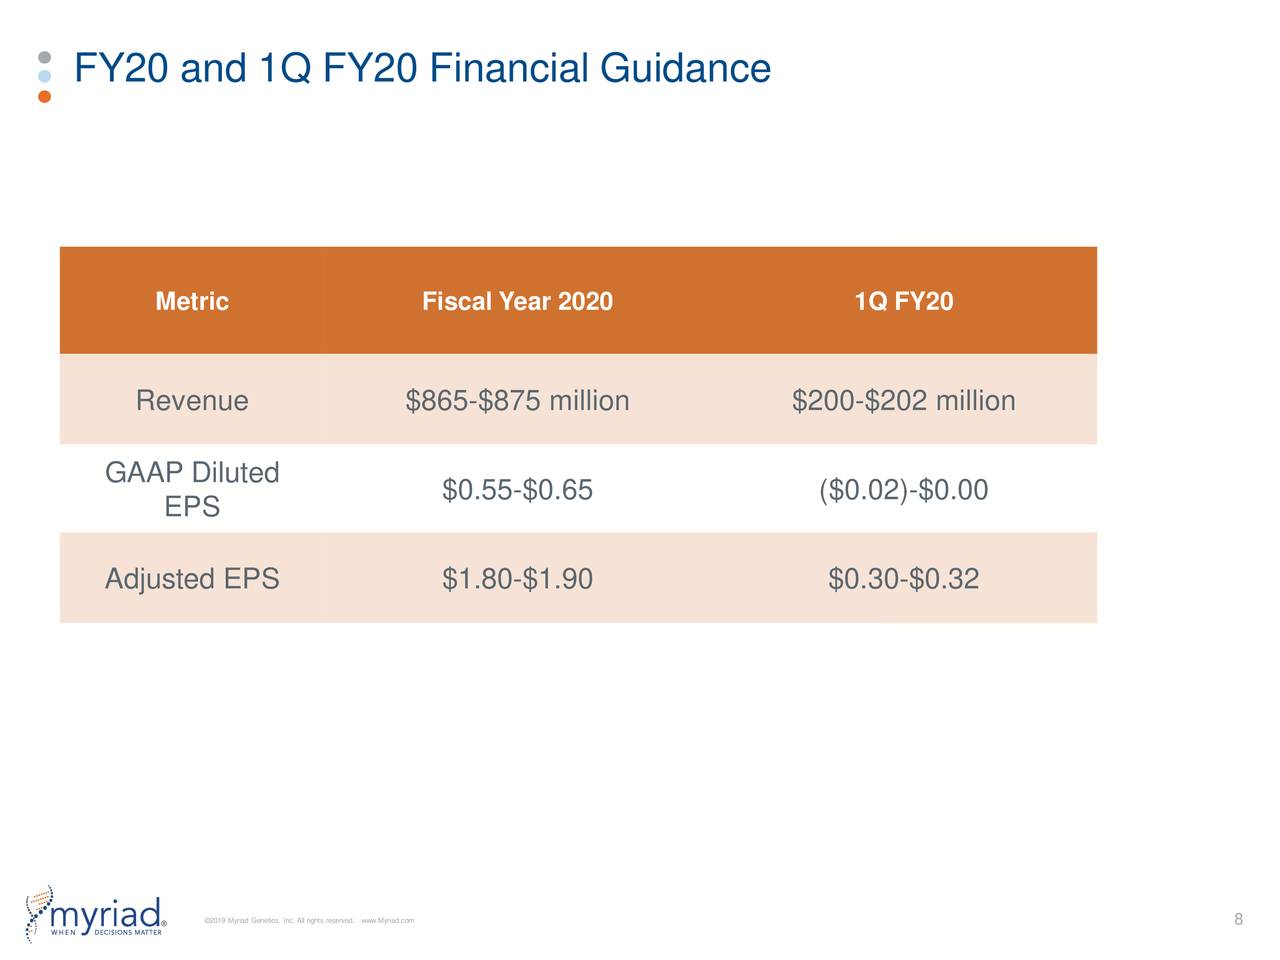 FY20 and 1Q FY20 Financial Guidance